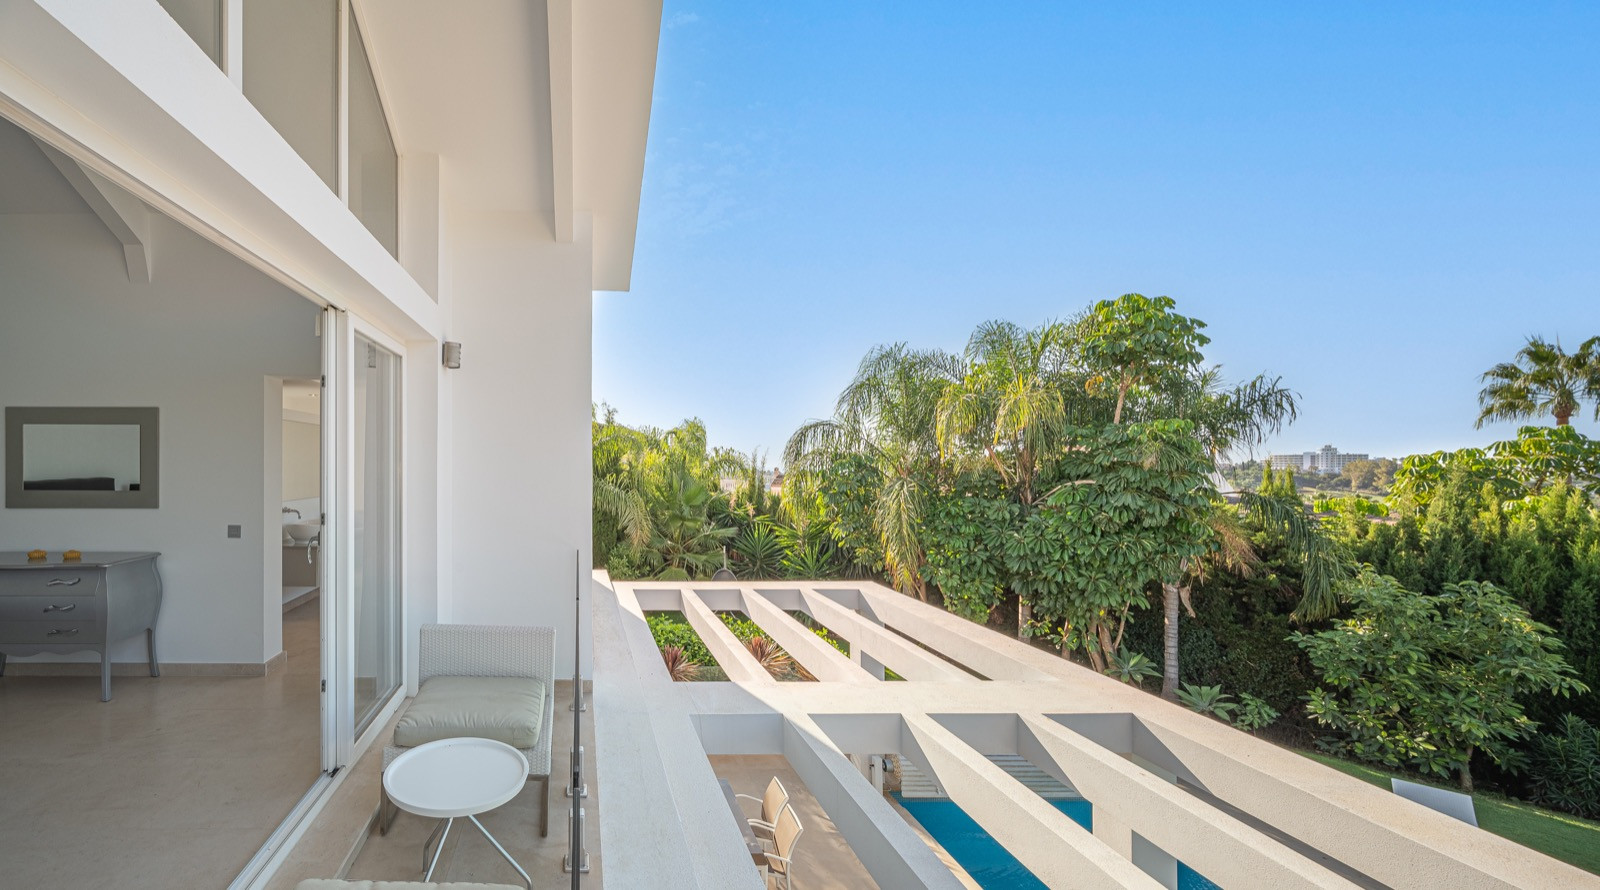 Great opportunity! Recently refurbished villa with great sea and garden views in Paraiso Alto